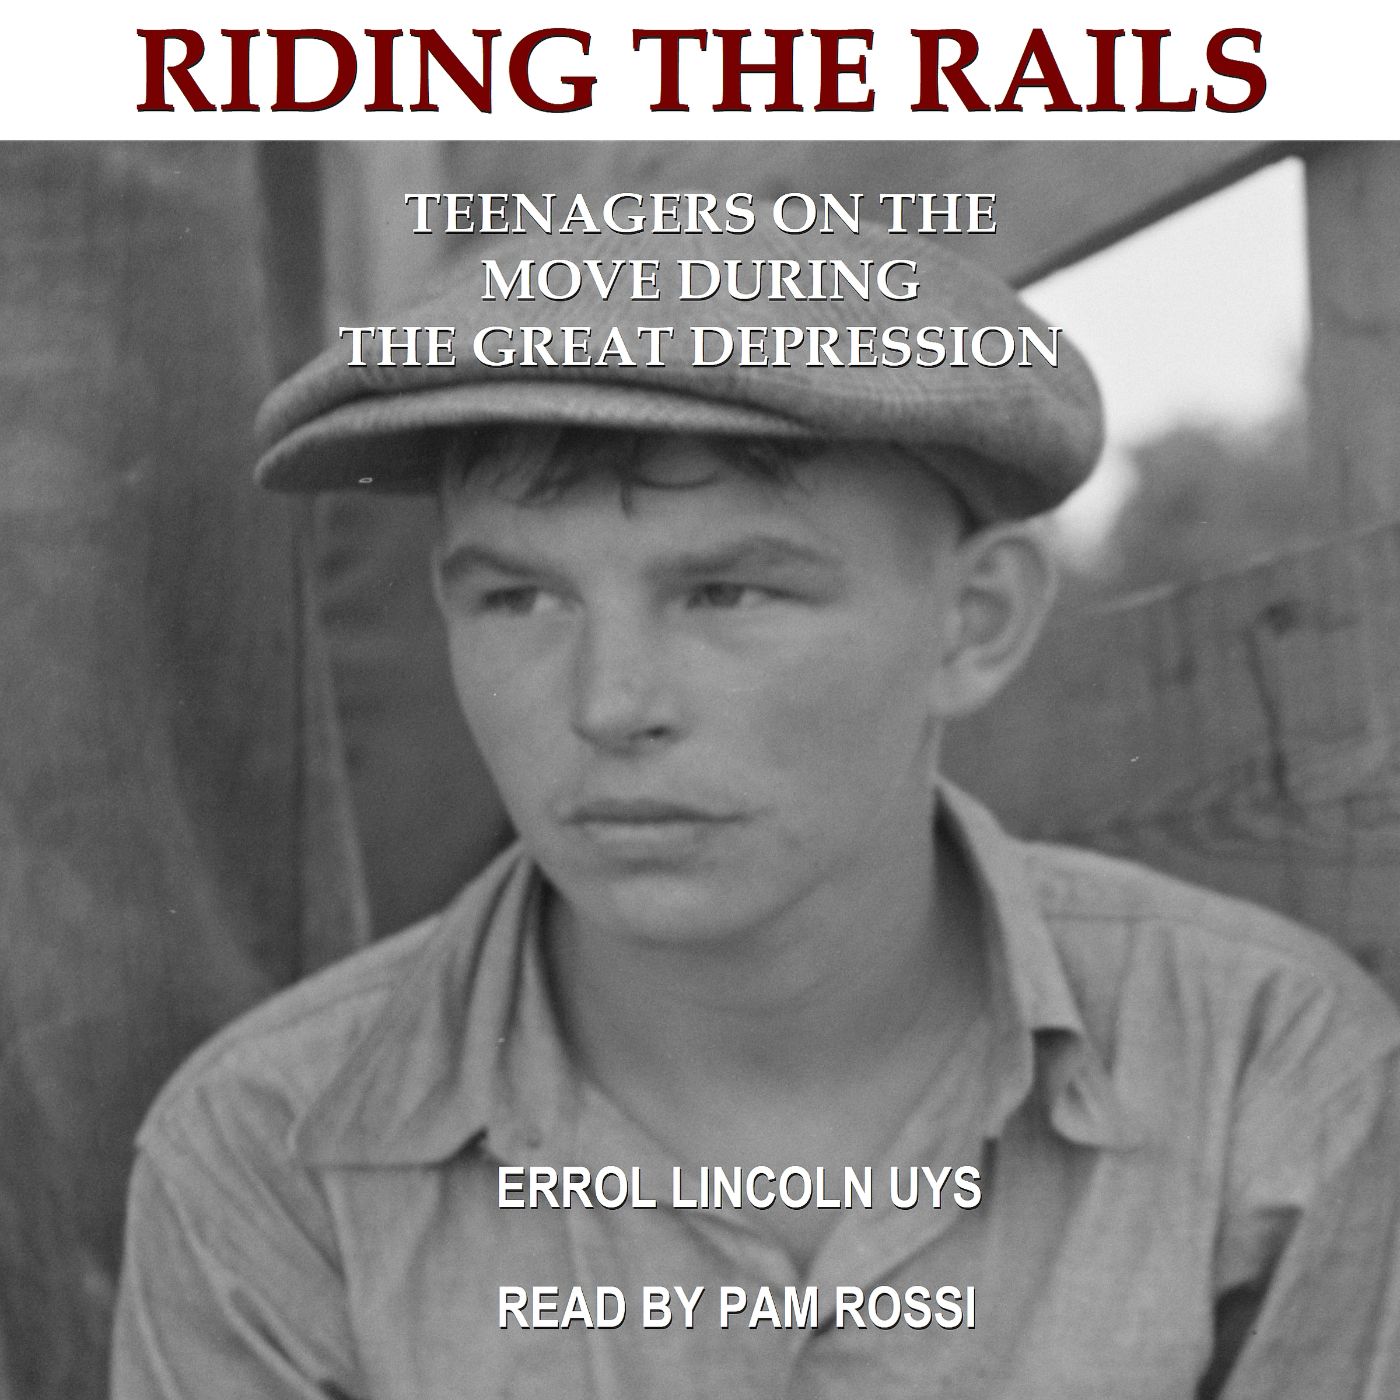 Riding the Rails: Teenagers on the Move During the Great Depression - Audiobook